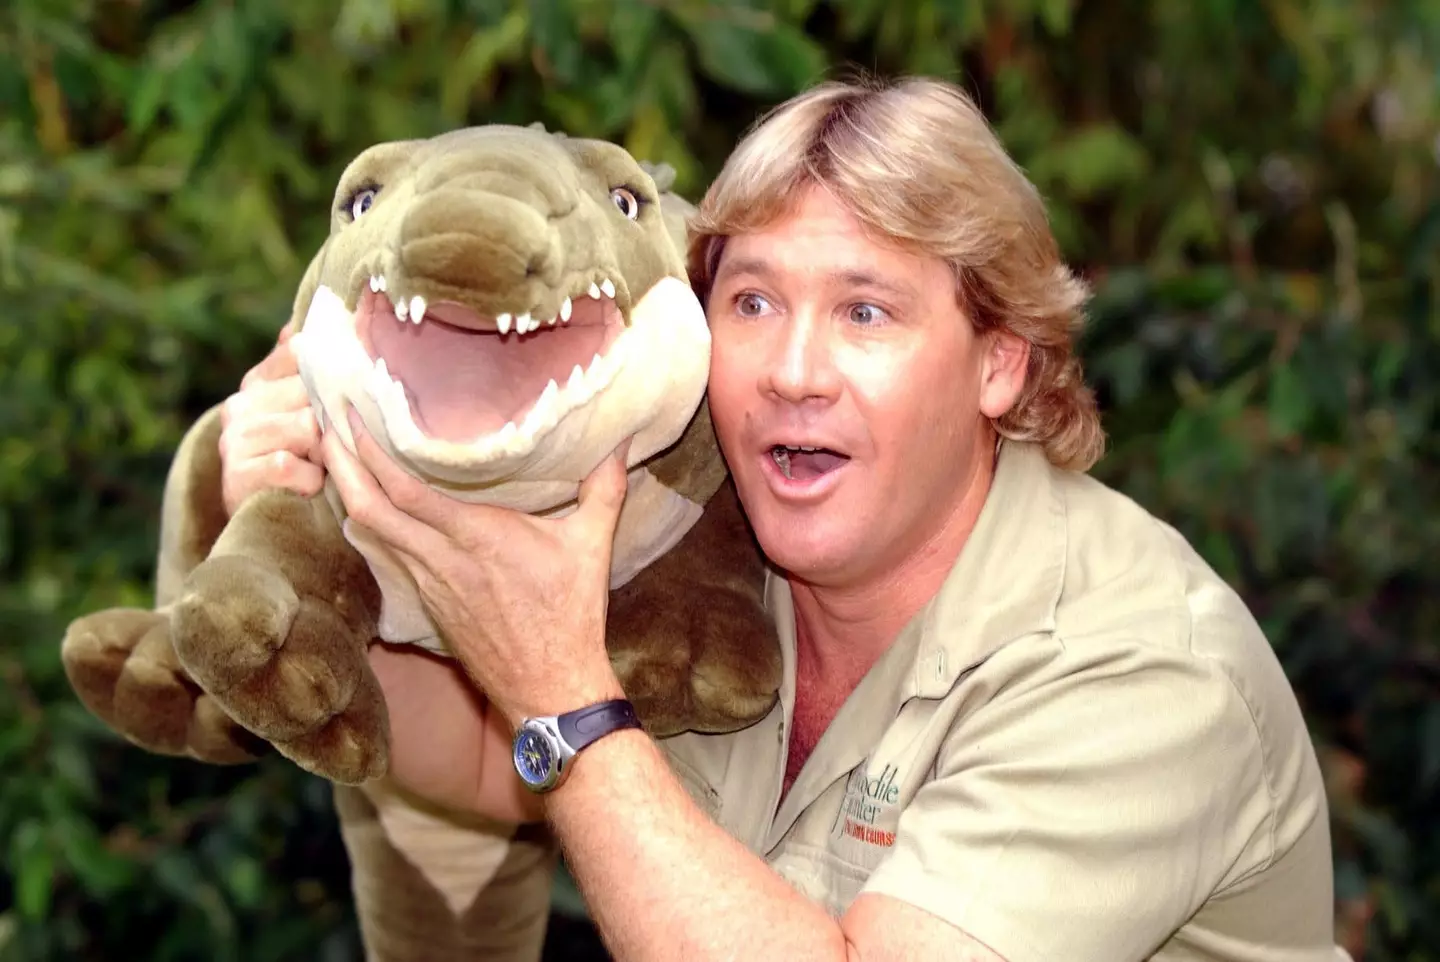 Steve Irwin passed away at the age of 44 after being attacked by a sting ray.